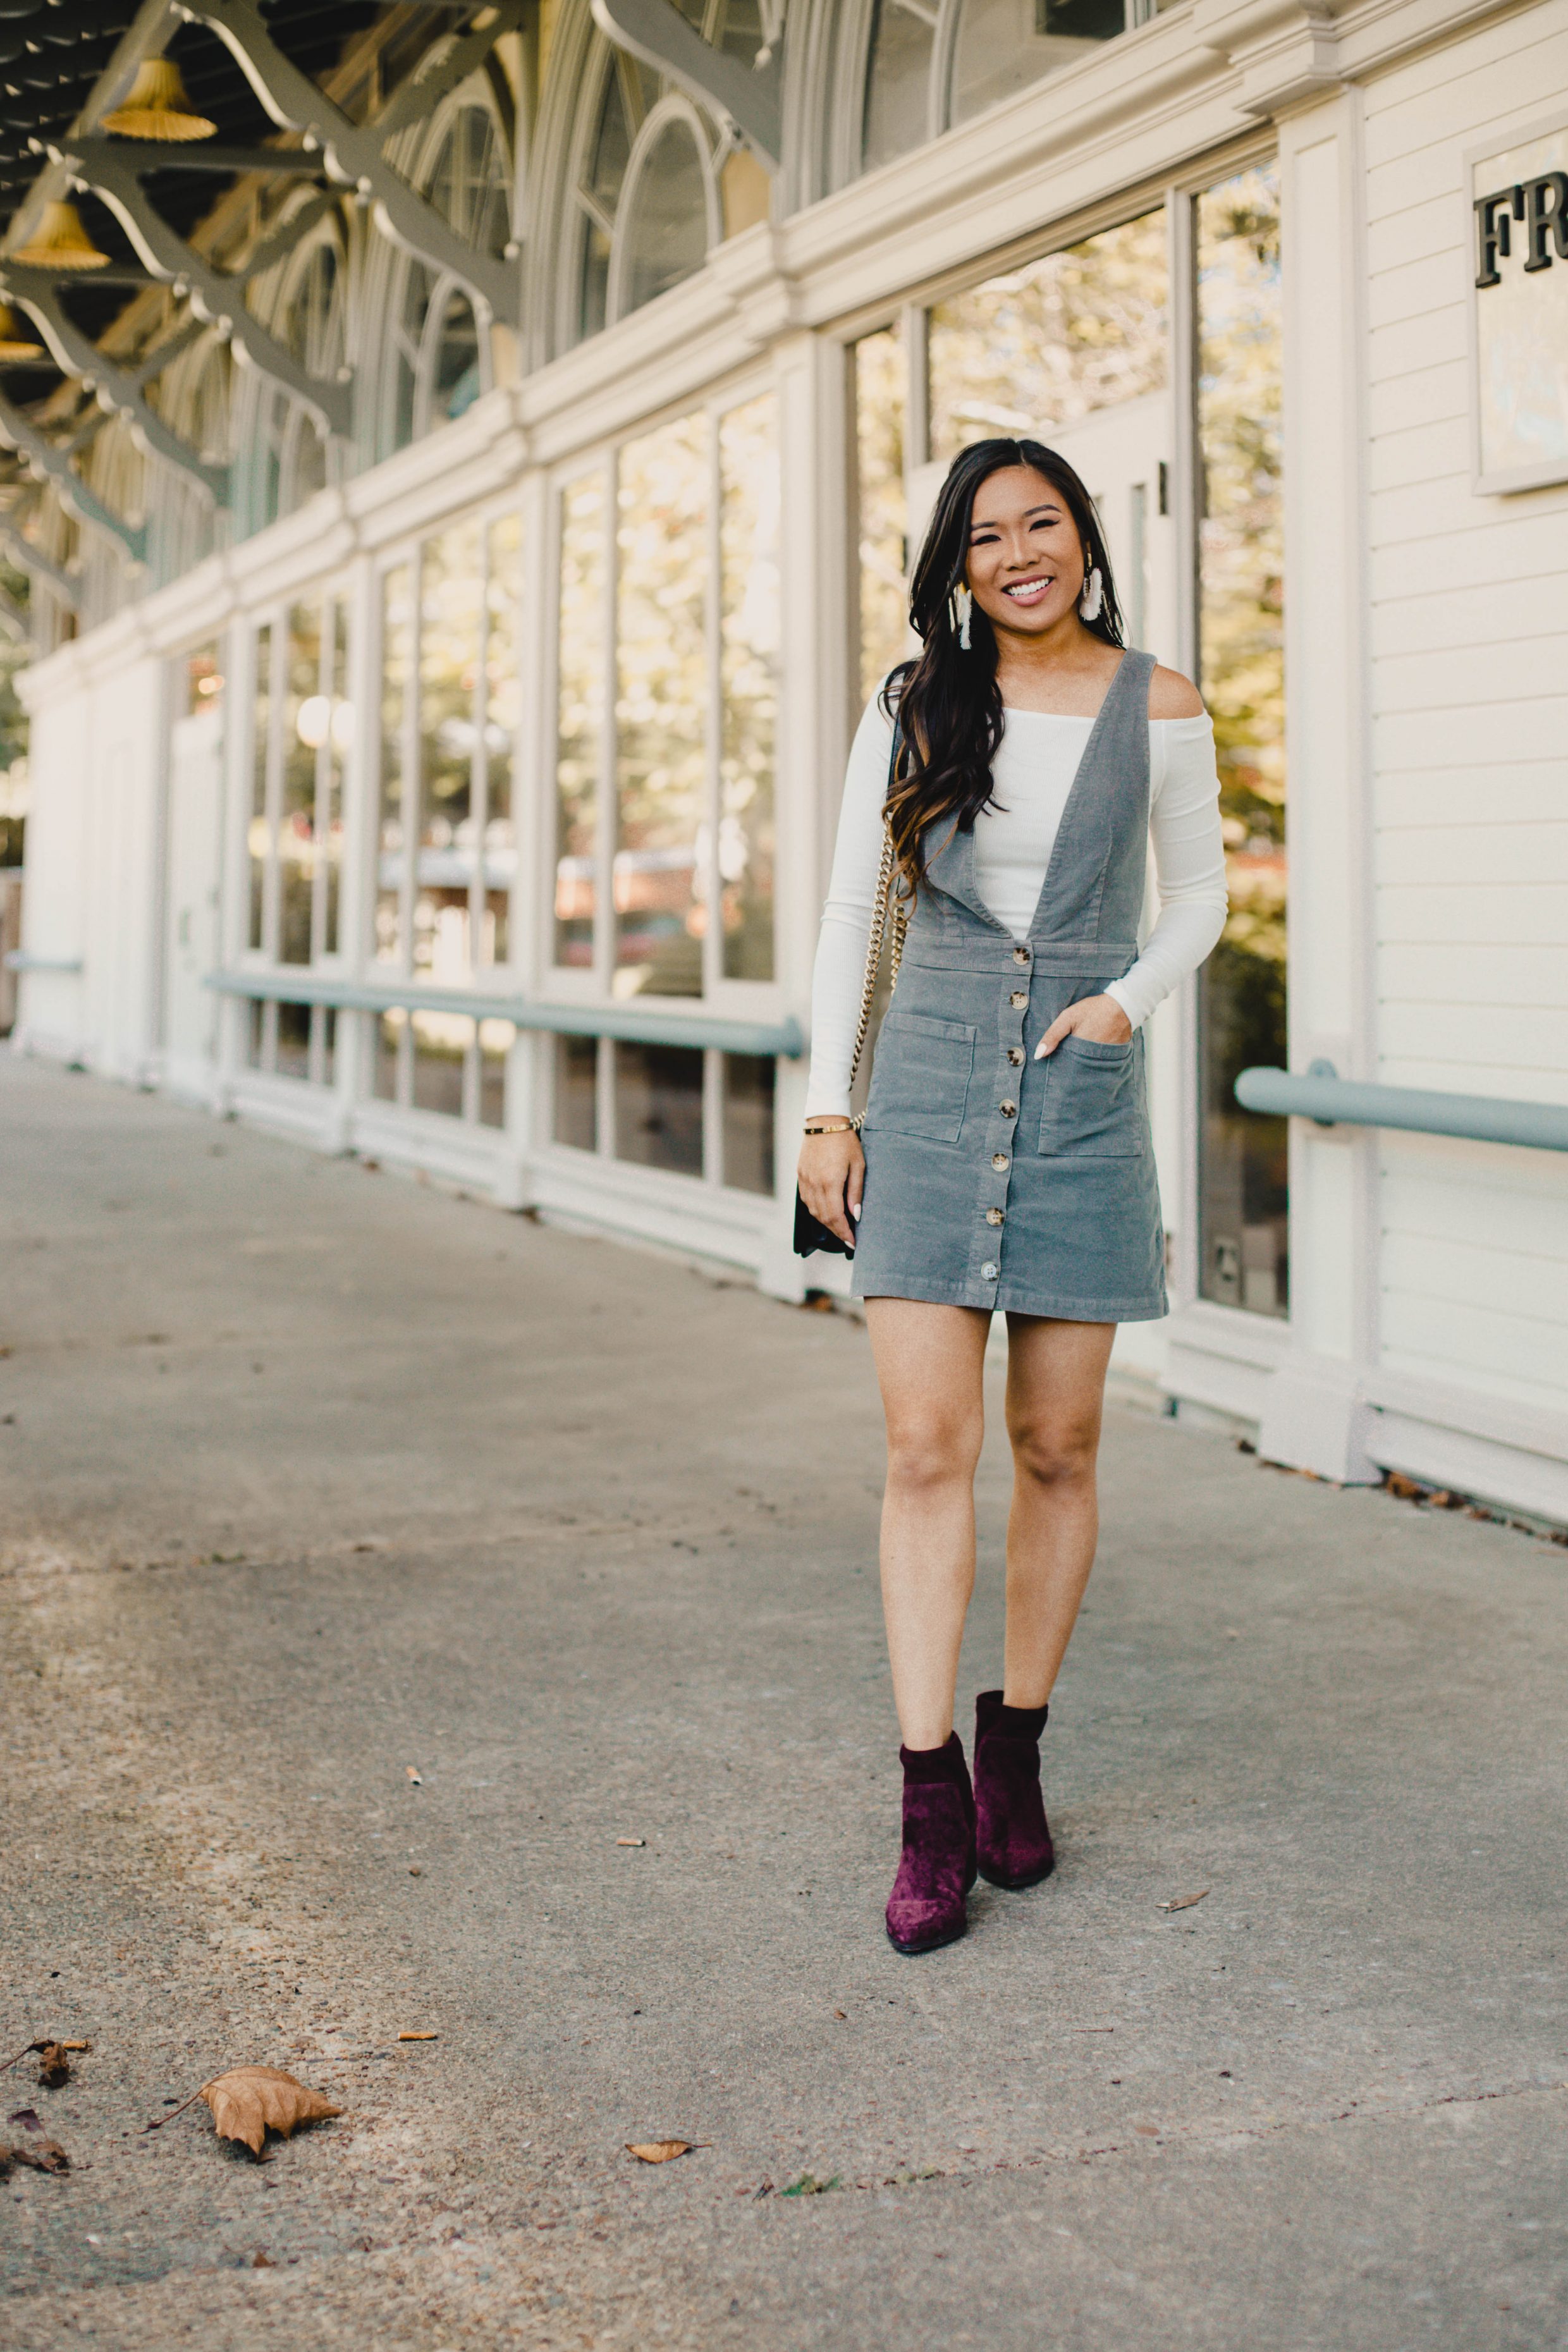 Blogger Hoang-Kim wears a corduroy overall dress with a white off-the-shoulder top for fall